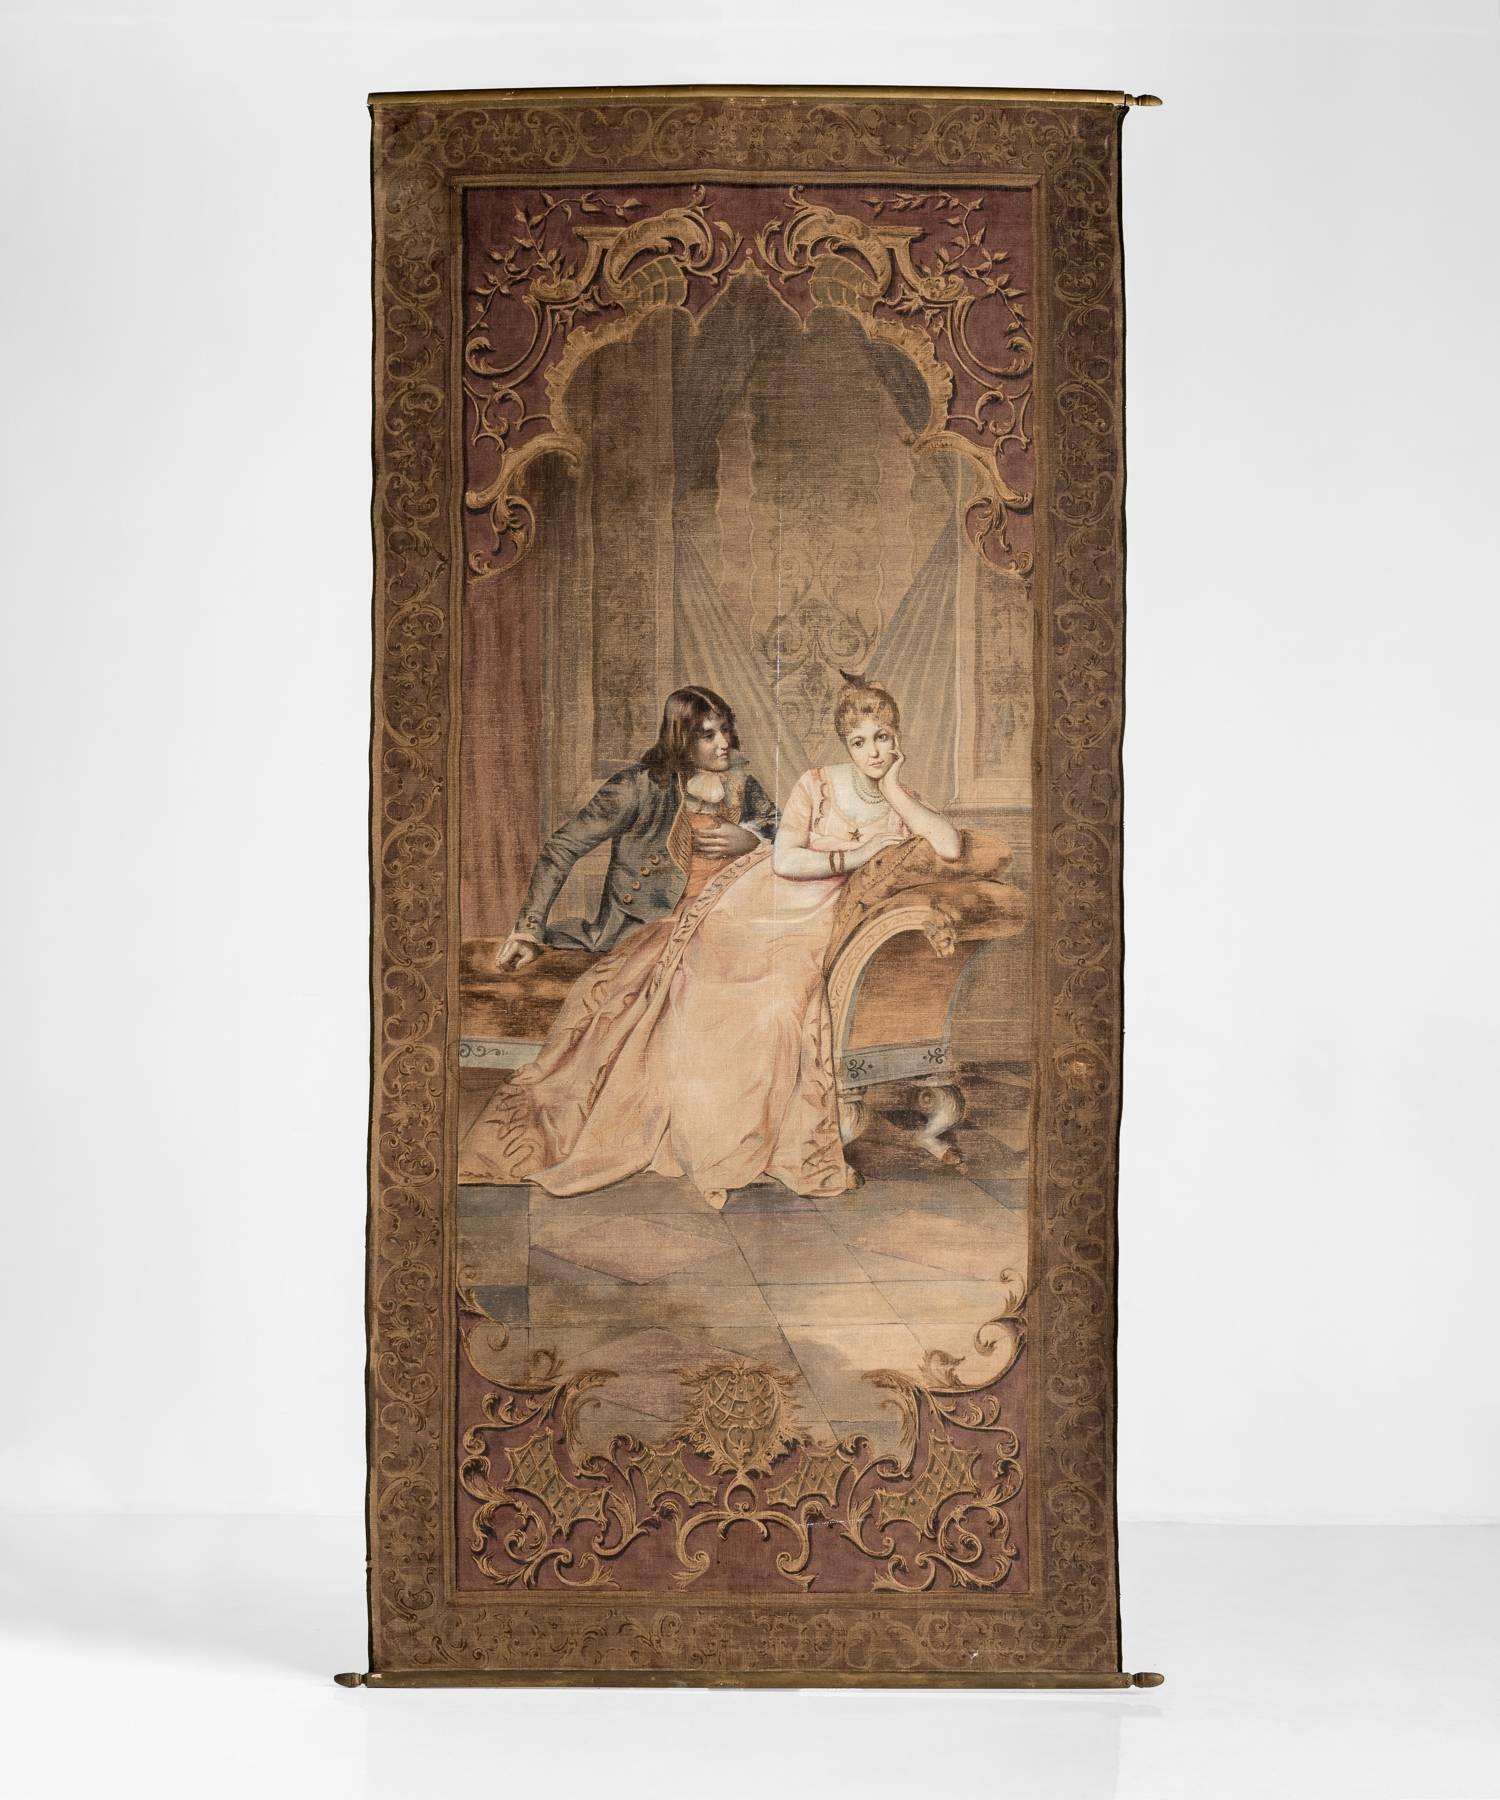 Italian tapestry, circa 19th century

Hand-painted “courtship” scene with wooden stretchers on each end.

Measures: 126